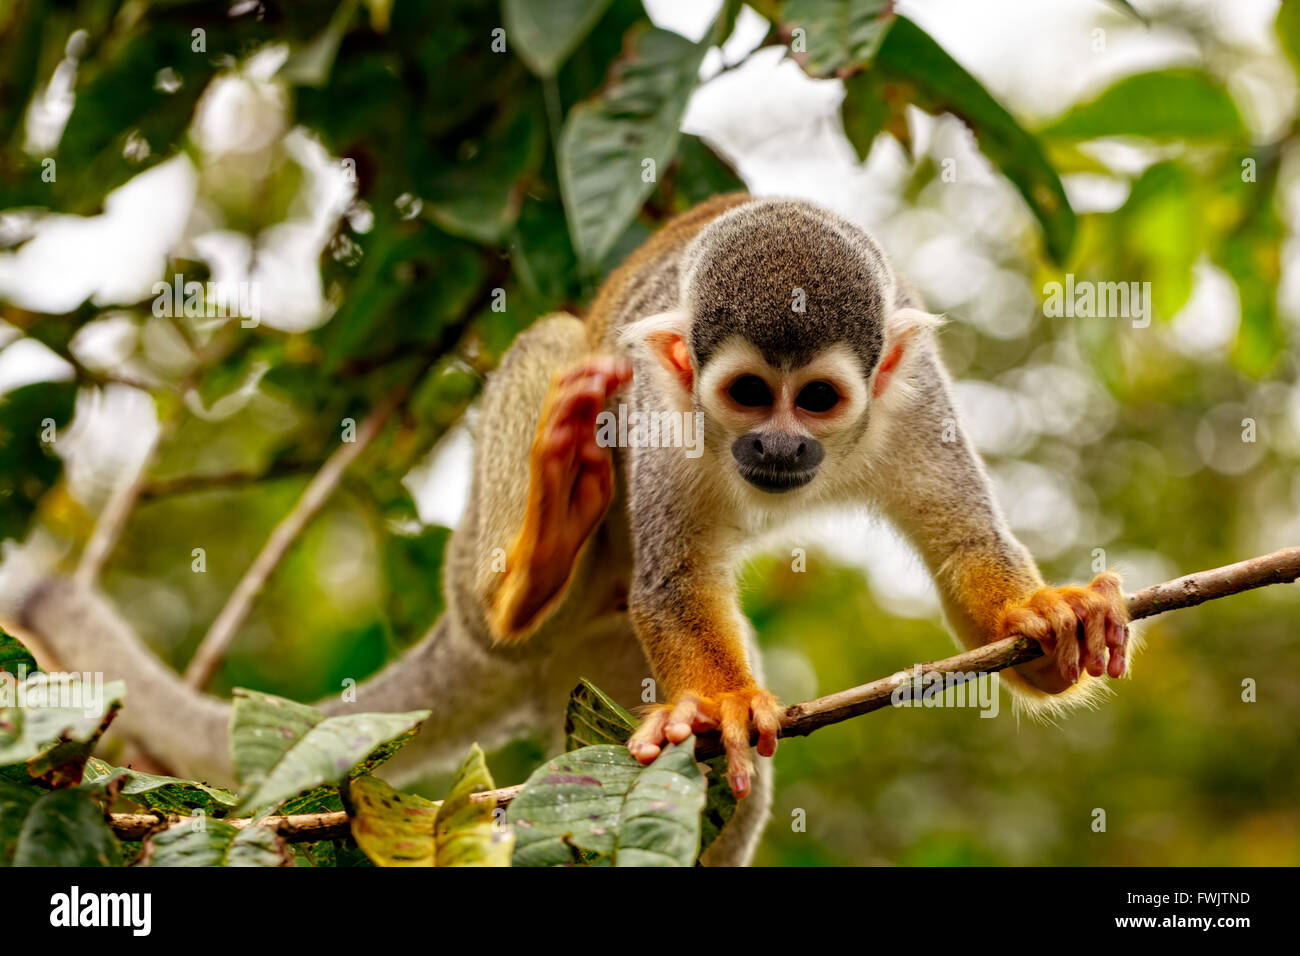 Common Squirrel Monkey, New World Monkey, Playing In The Trees Stock Photo